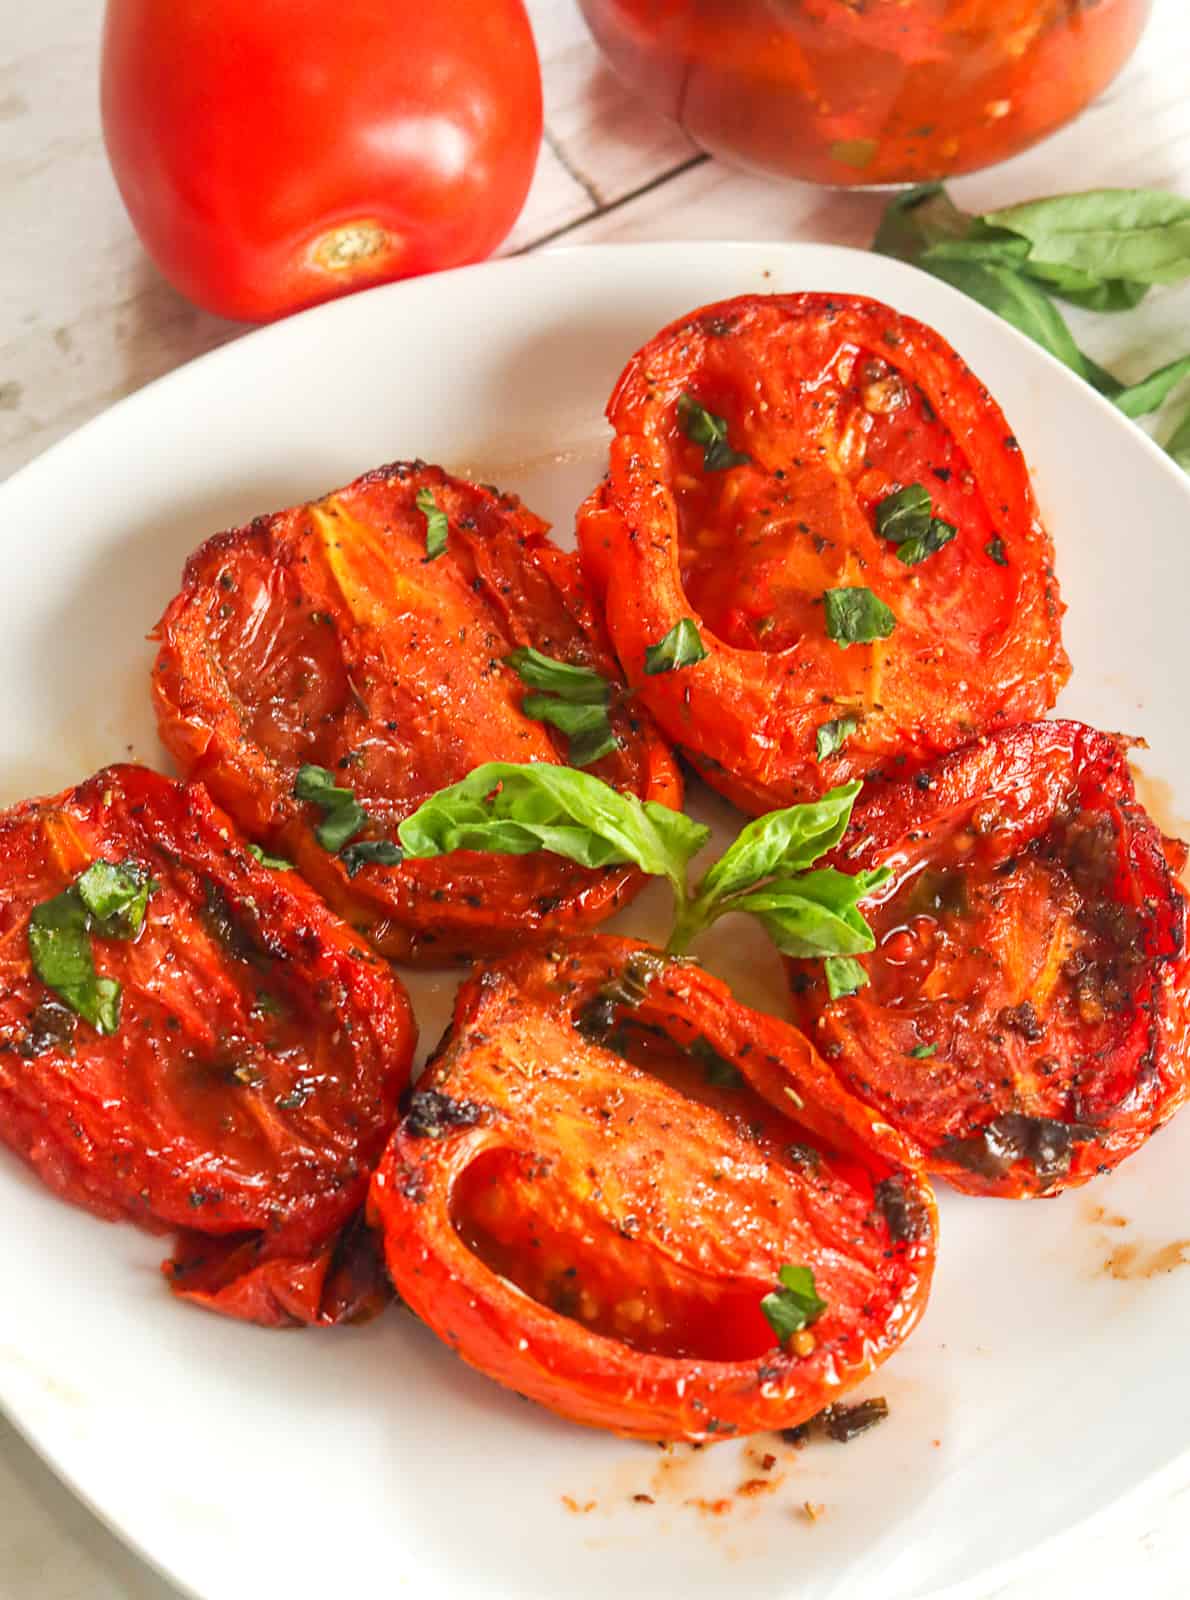 Fire roasted tomatoes to ramp up any recipe